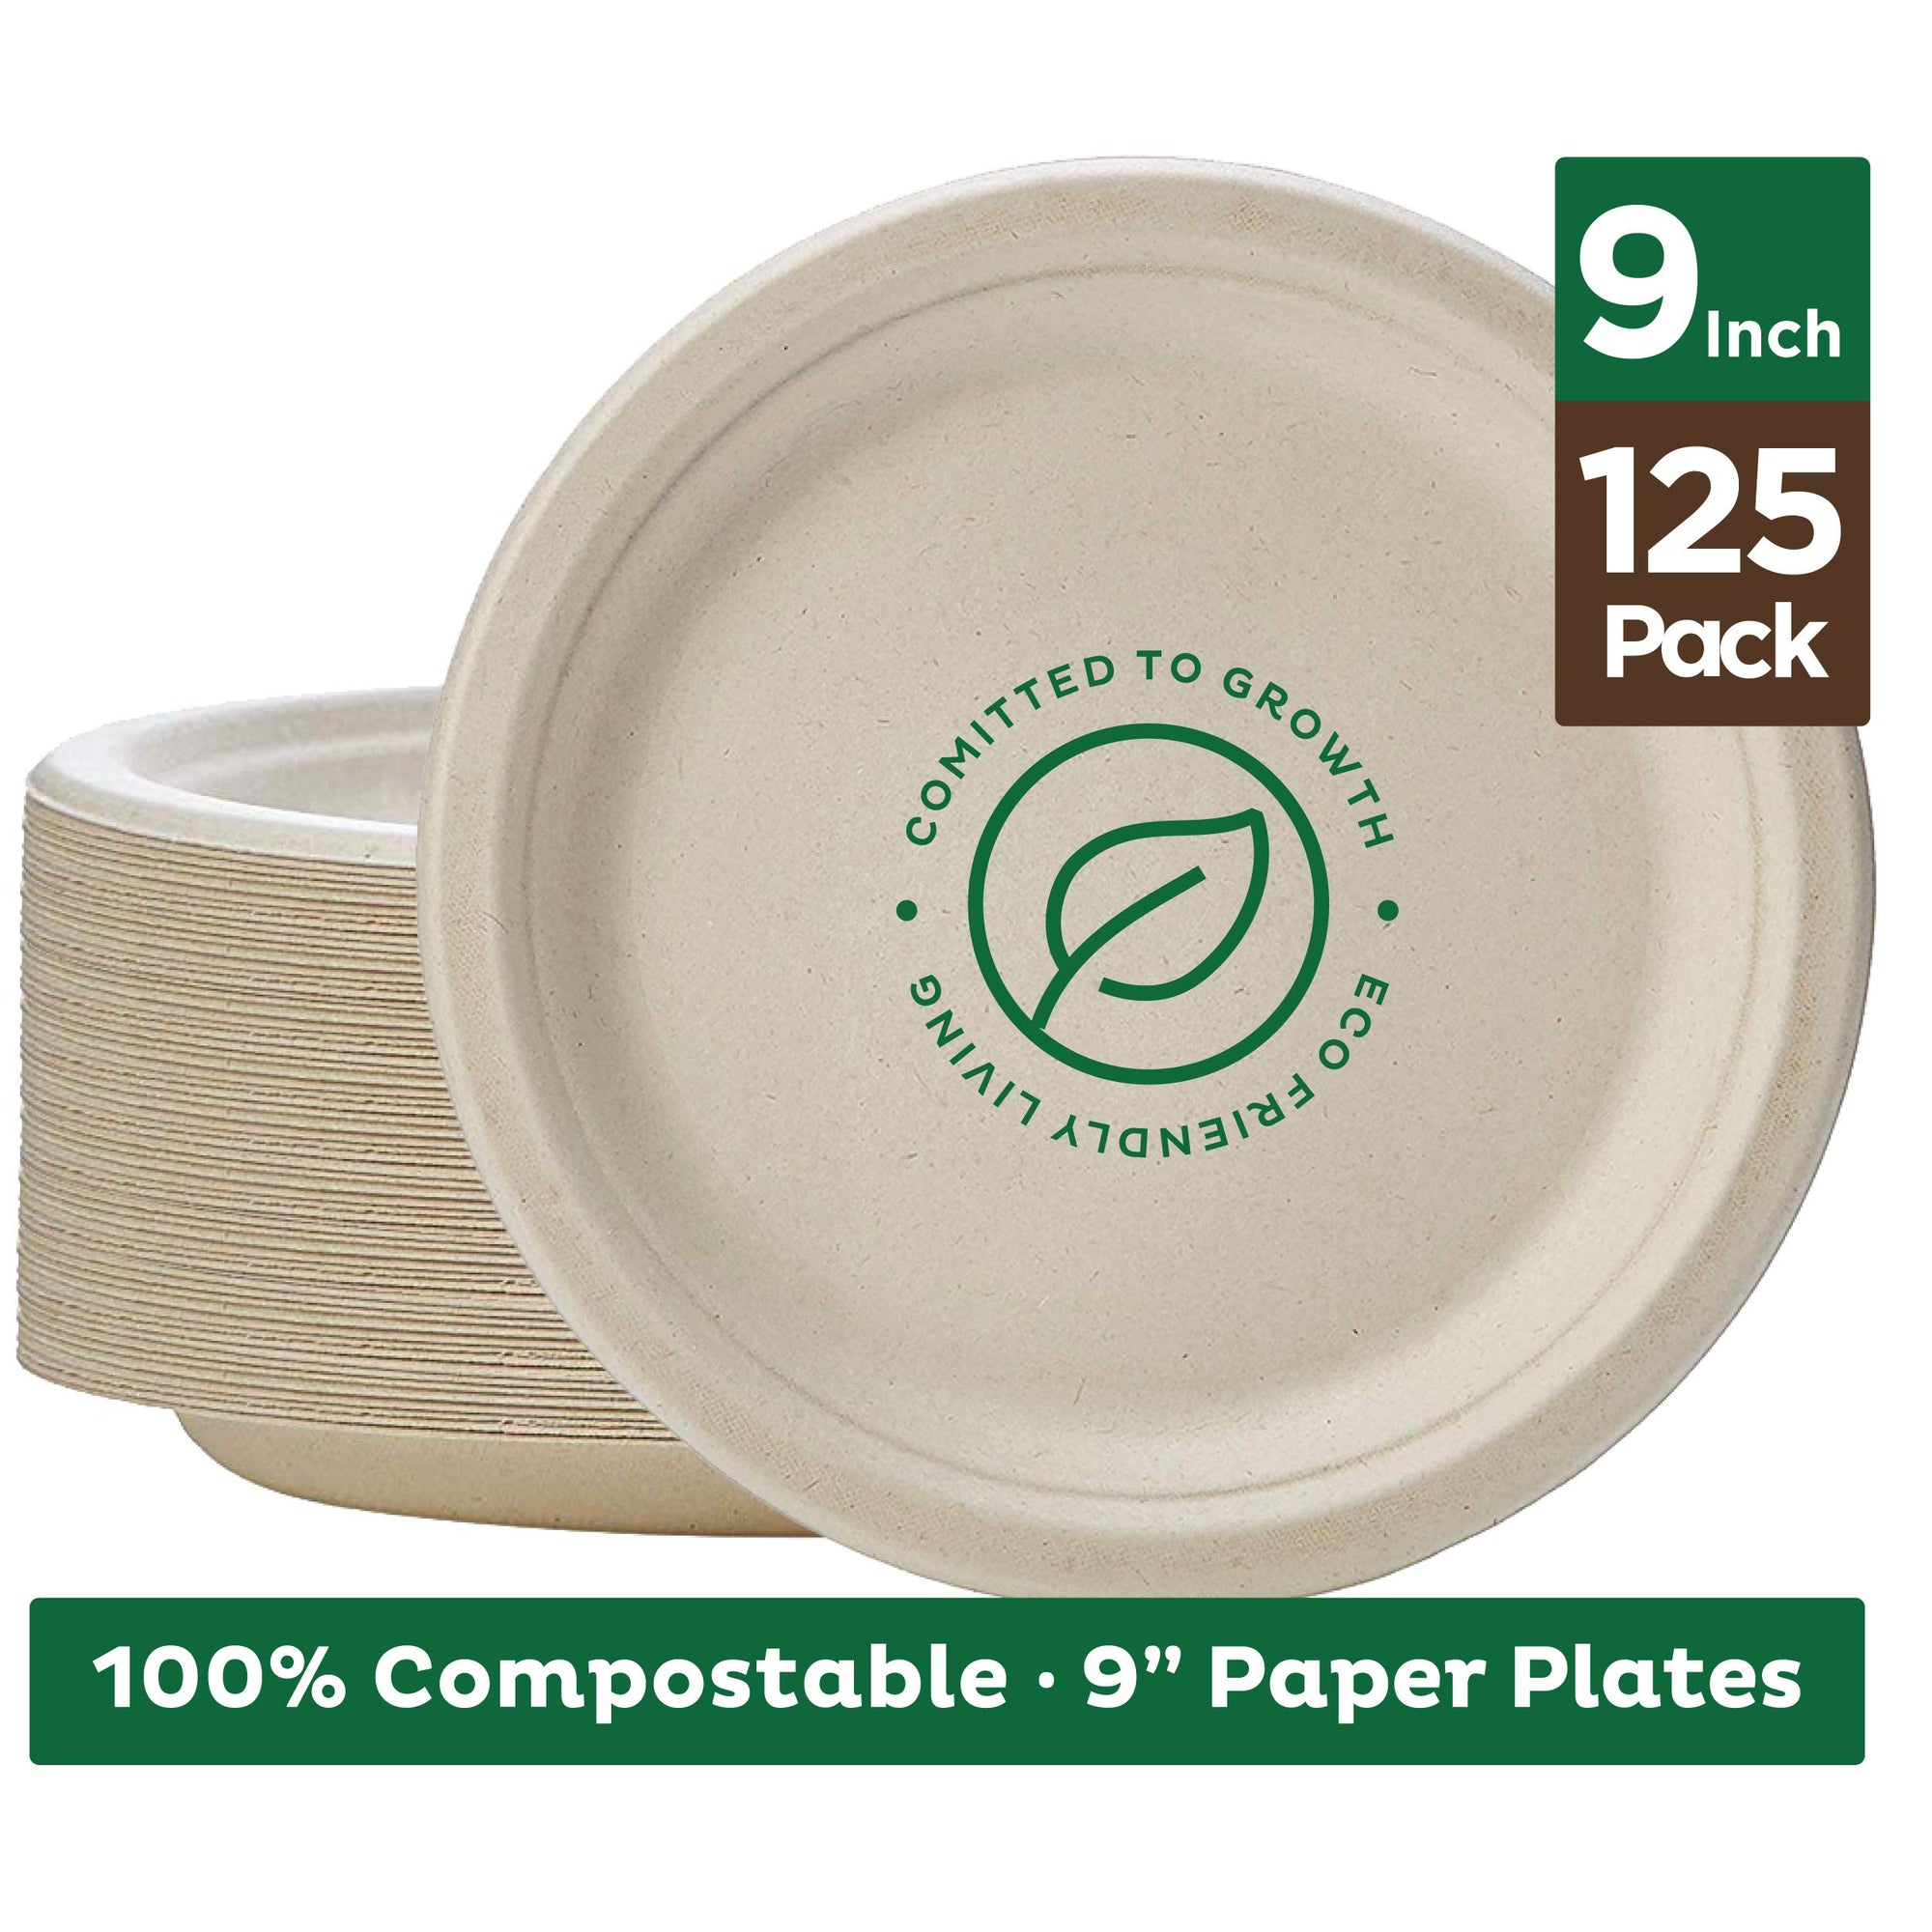 Stack Man 100% Compostable 9" Paper Plates [125-Pack] Heavy Duty Eco-Friendly Made of Sugar Cane